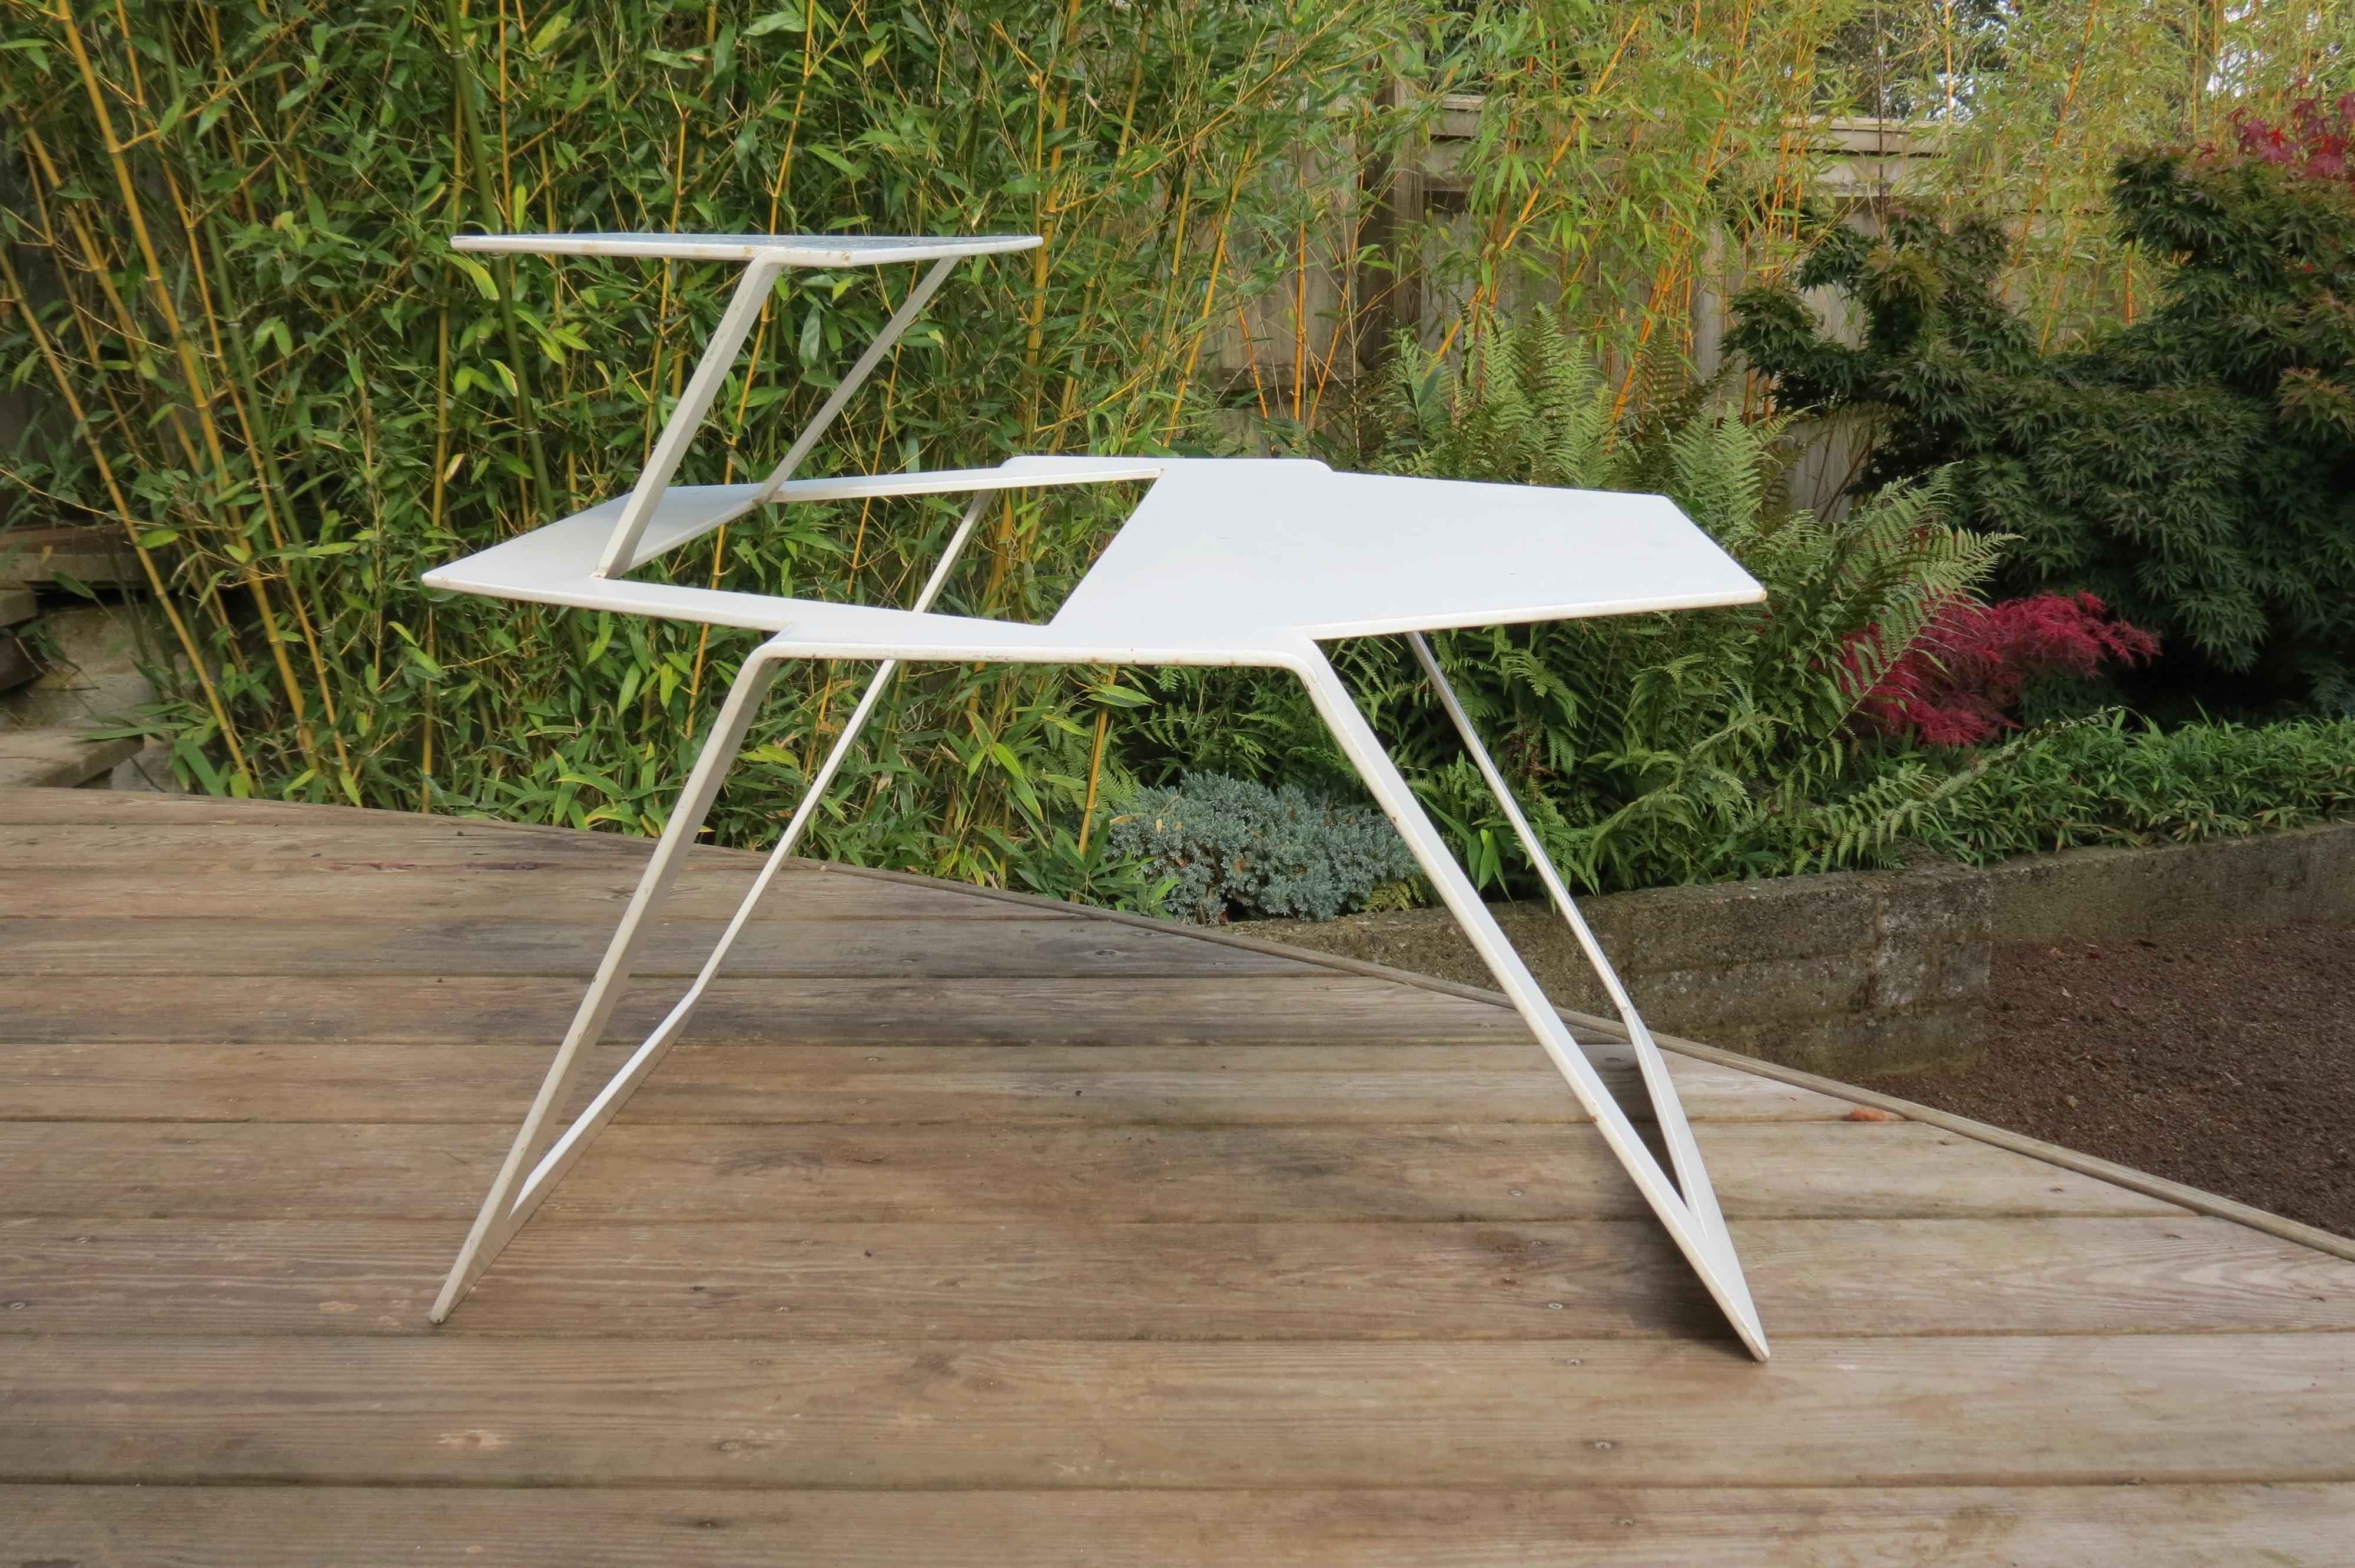 A very good quality metal table from the 1990s, good quality thick steel. Very cleverly cut and formed from one sheet of metal. Possibly a prototype.
Good over all condition, some wear and minor loss to the paint and distressing over all. 
Price is